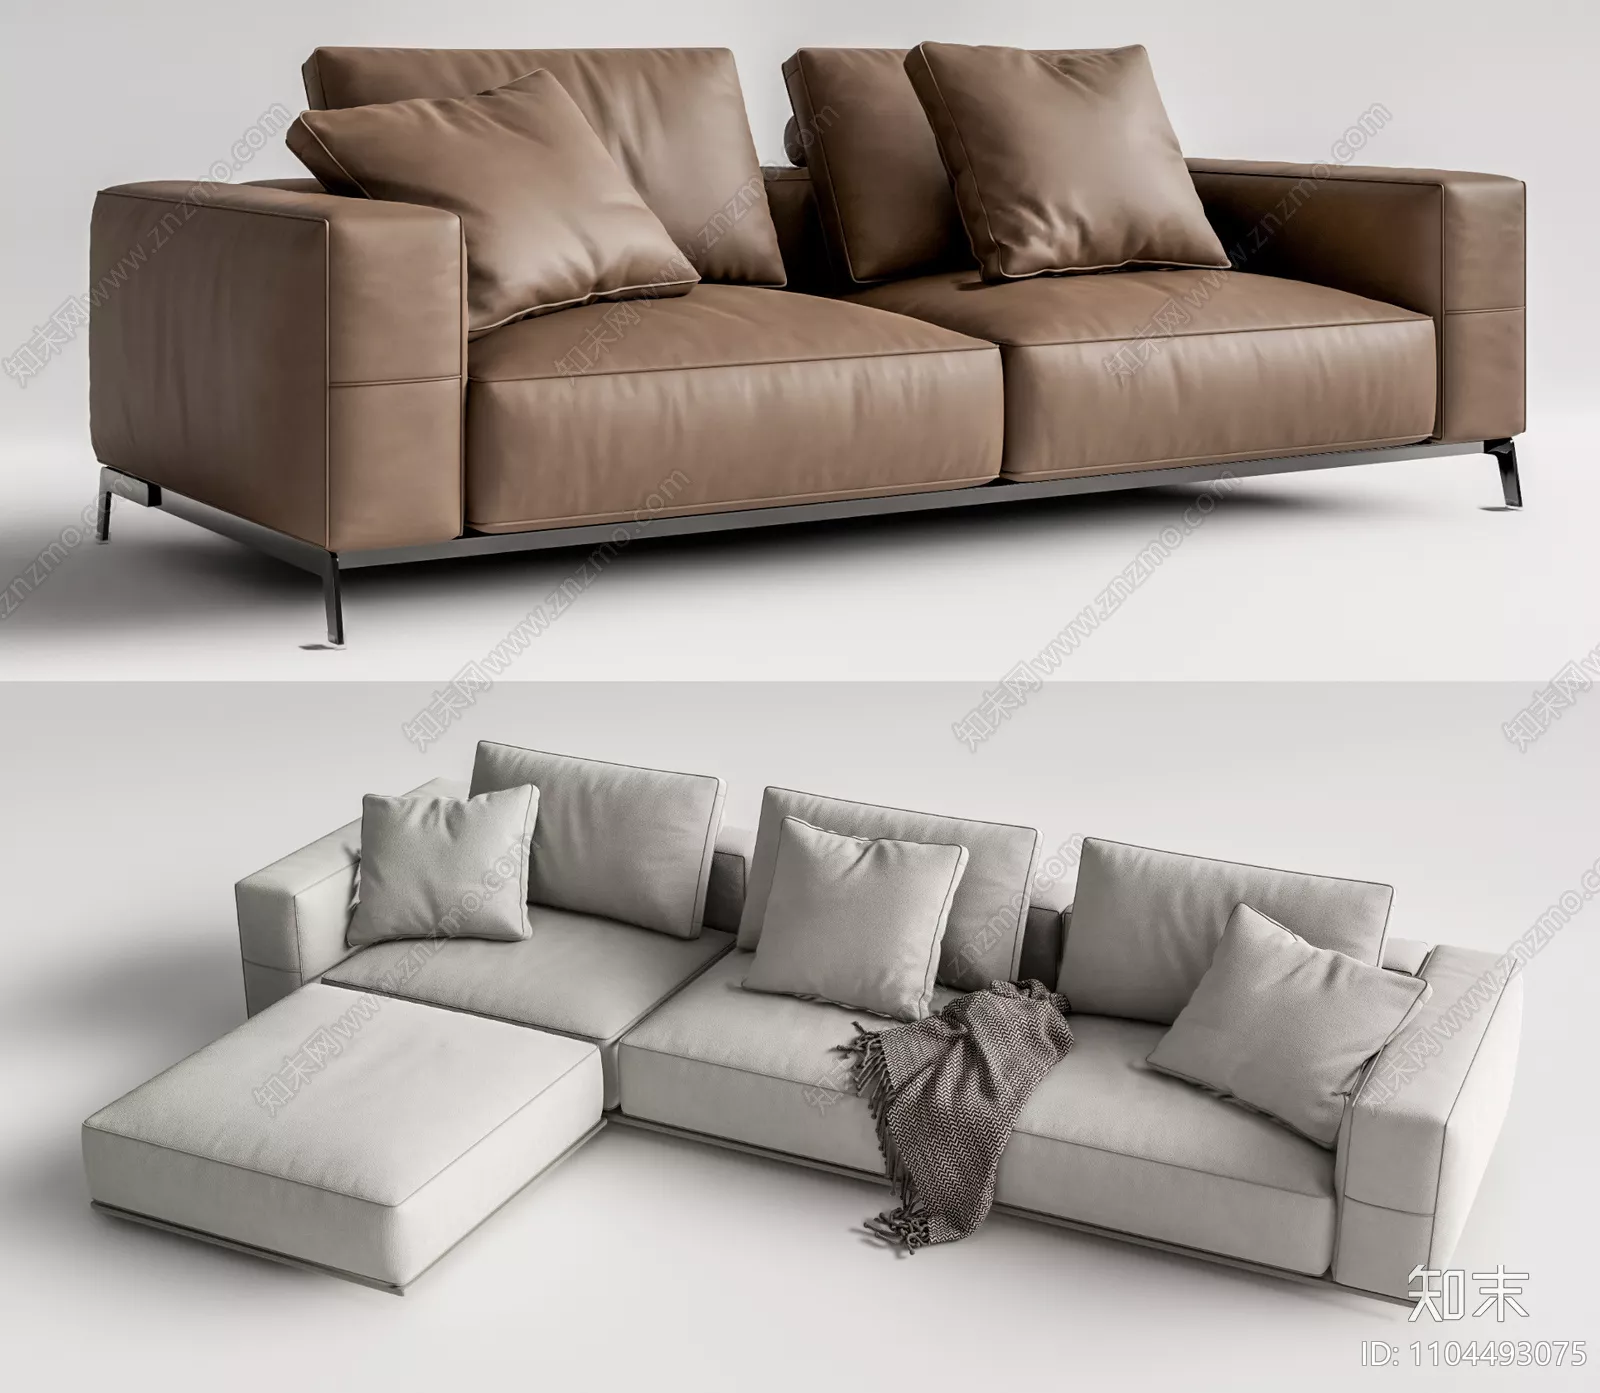 MODERN SOFA - SKETCHUP 3D MODEL - VRAY OR ENSCAPE - ID13147